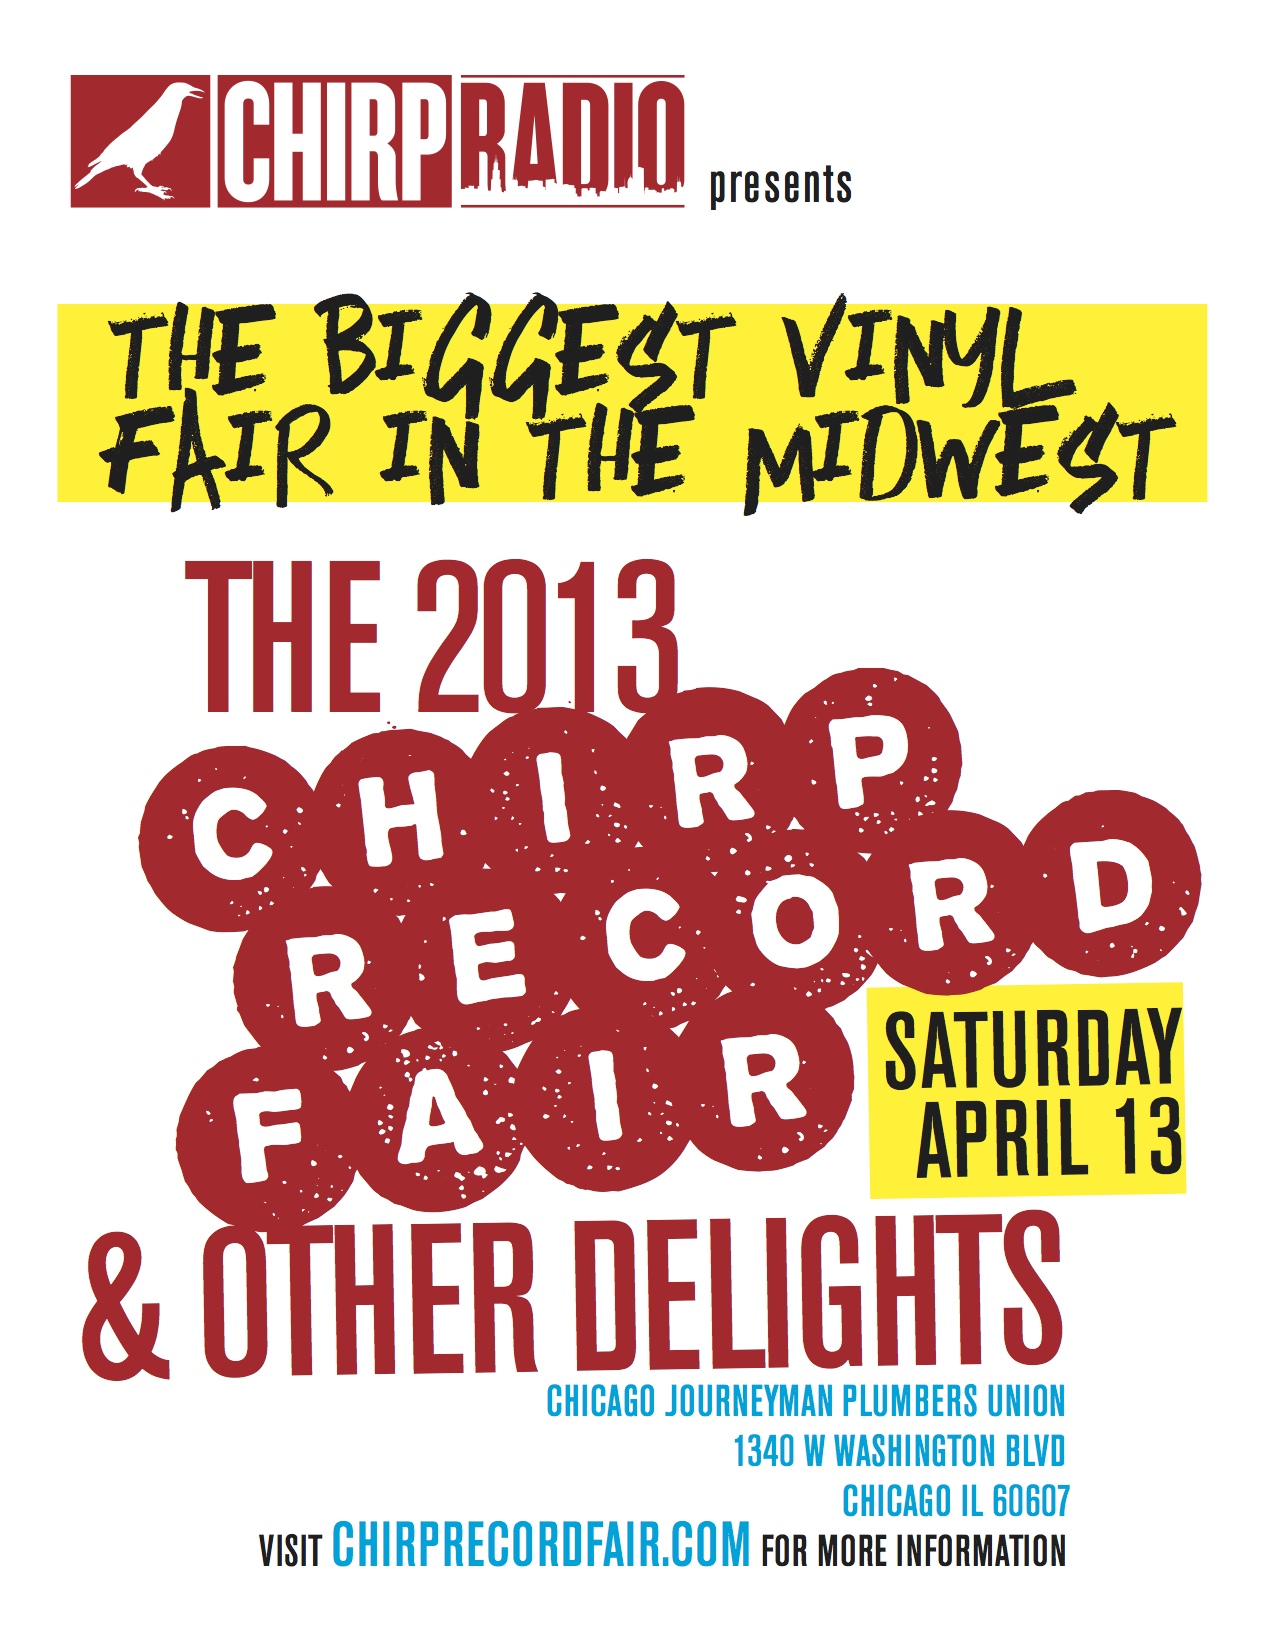 CHIRP Record Fair Returns, Condenses Into One Day The Chicagoist